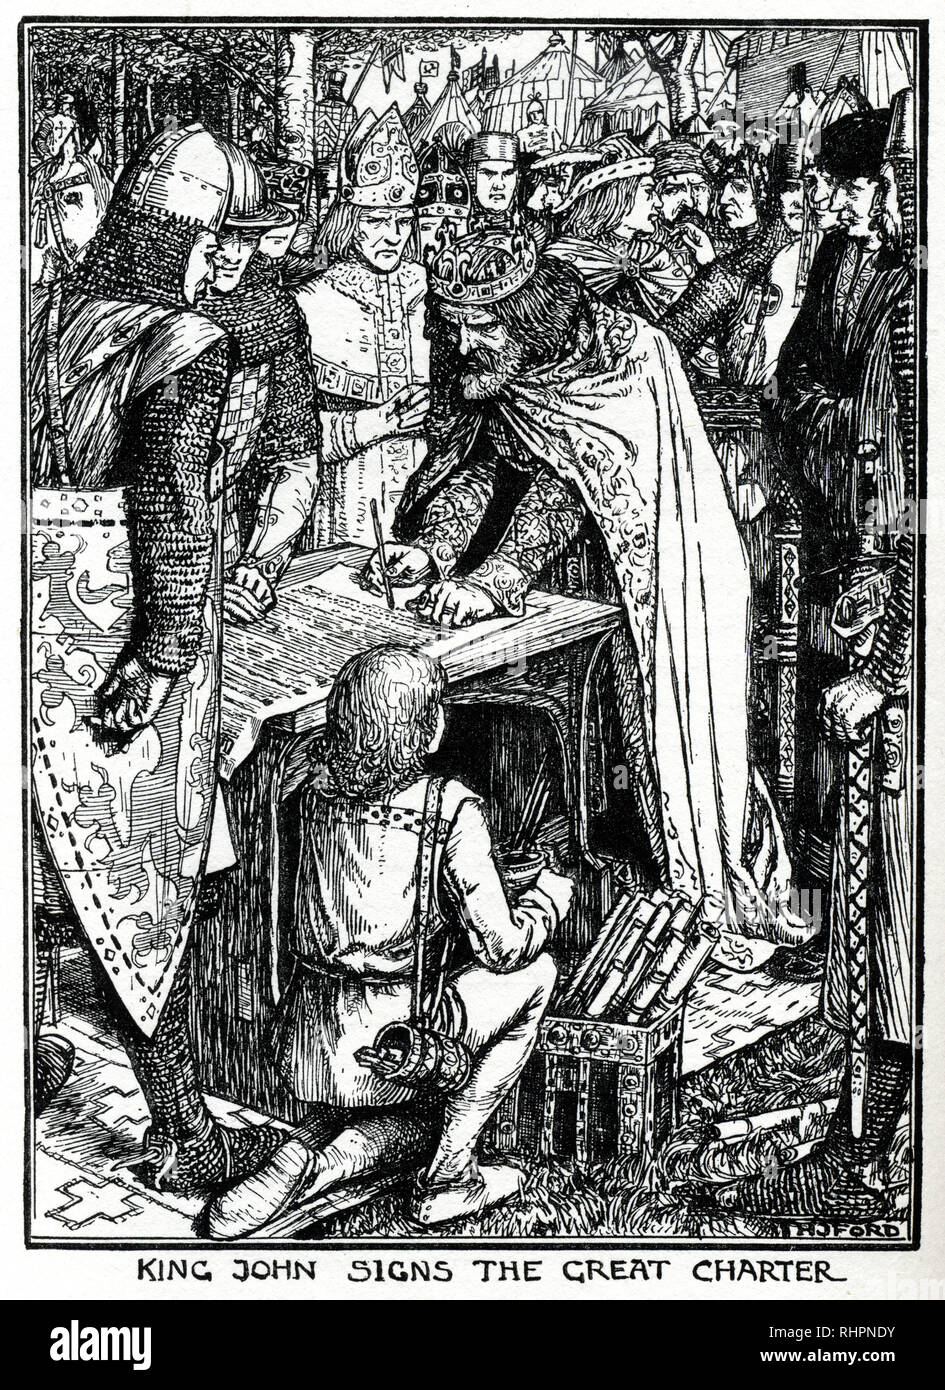 King John signs the Great Charter. By Henry Justice Ford (1860-1941). King John (1166-1216), also known as John Lackland, was King of England from 1199 to 1216. The baronial revolt at the end of John's reign led to the sealing of Magna Carta. Stock Photo